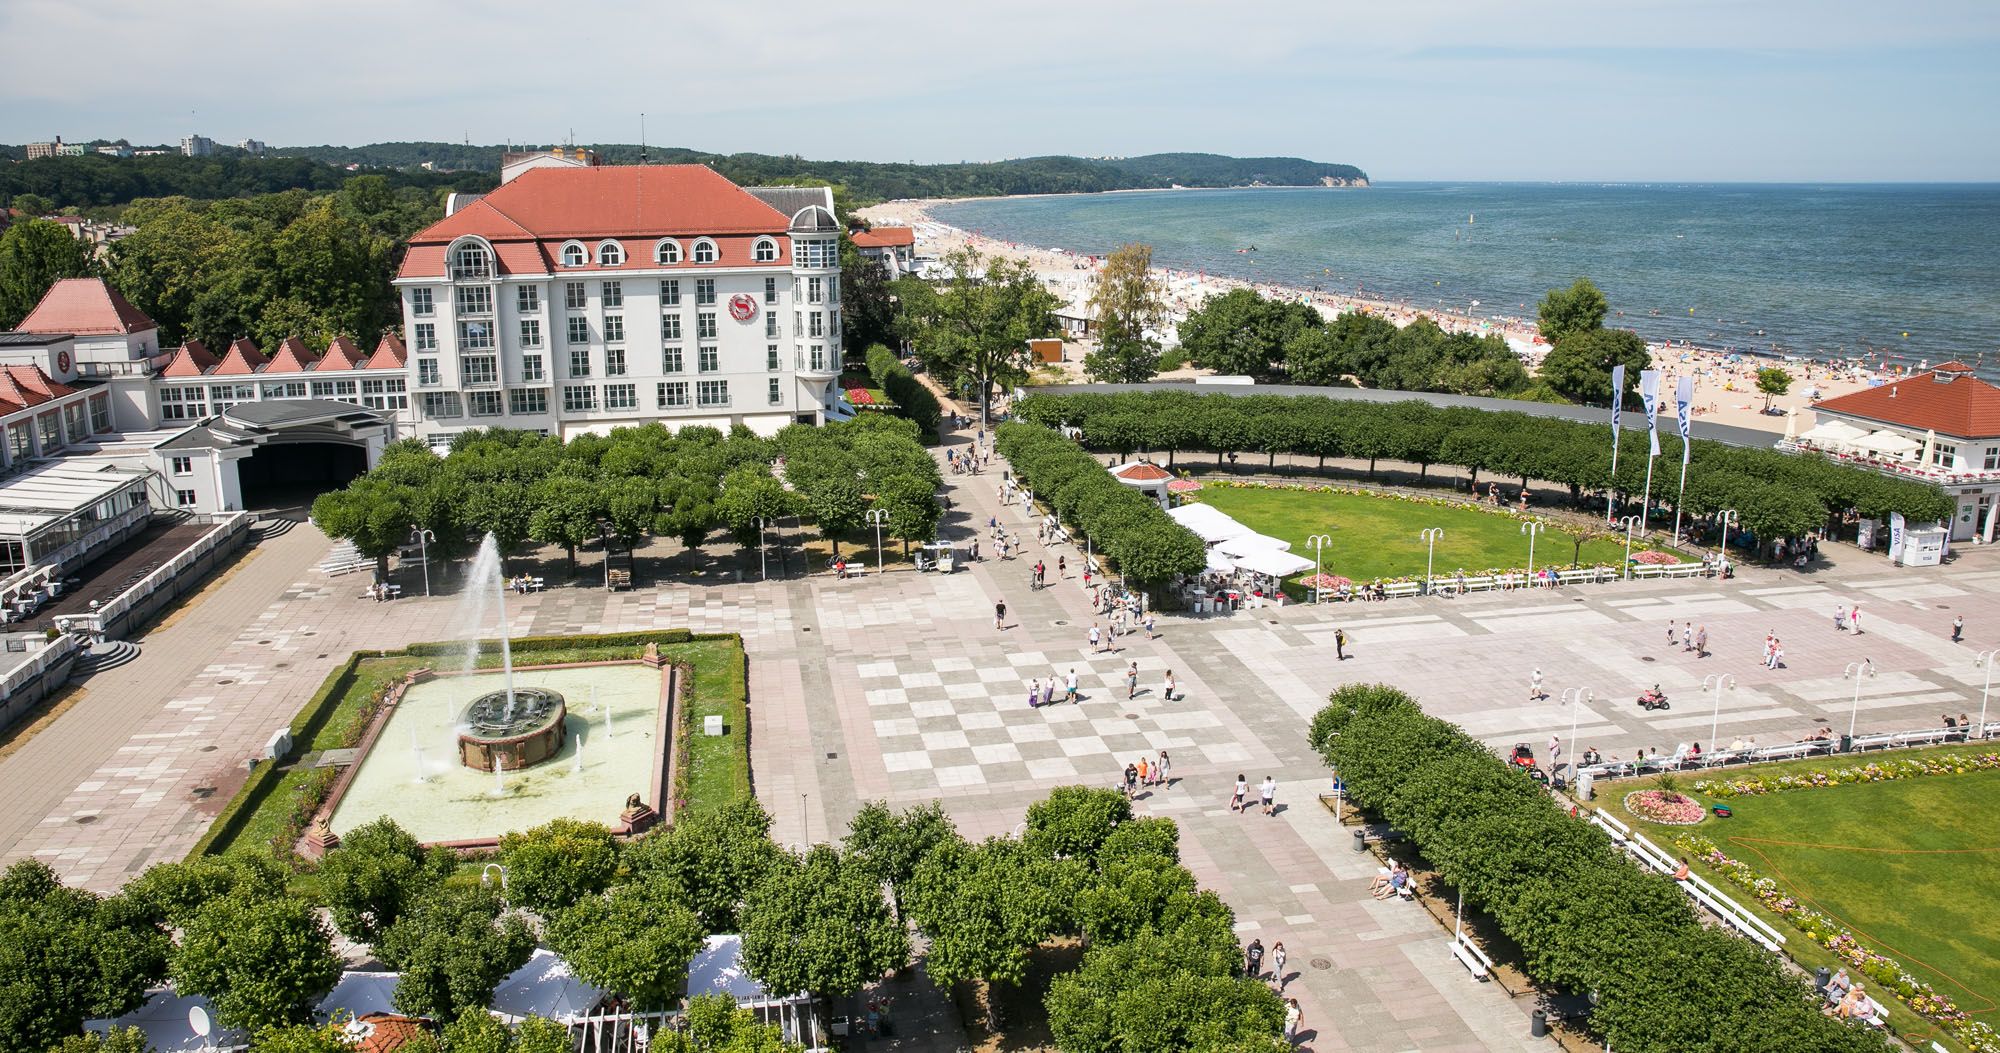 Featured image for “Tri-City Day Trip: How to Visit Gdynia and Sopot from Gdansk”